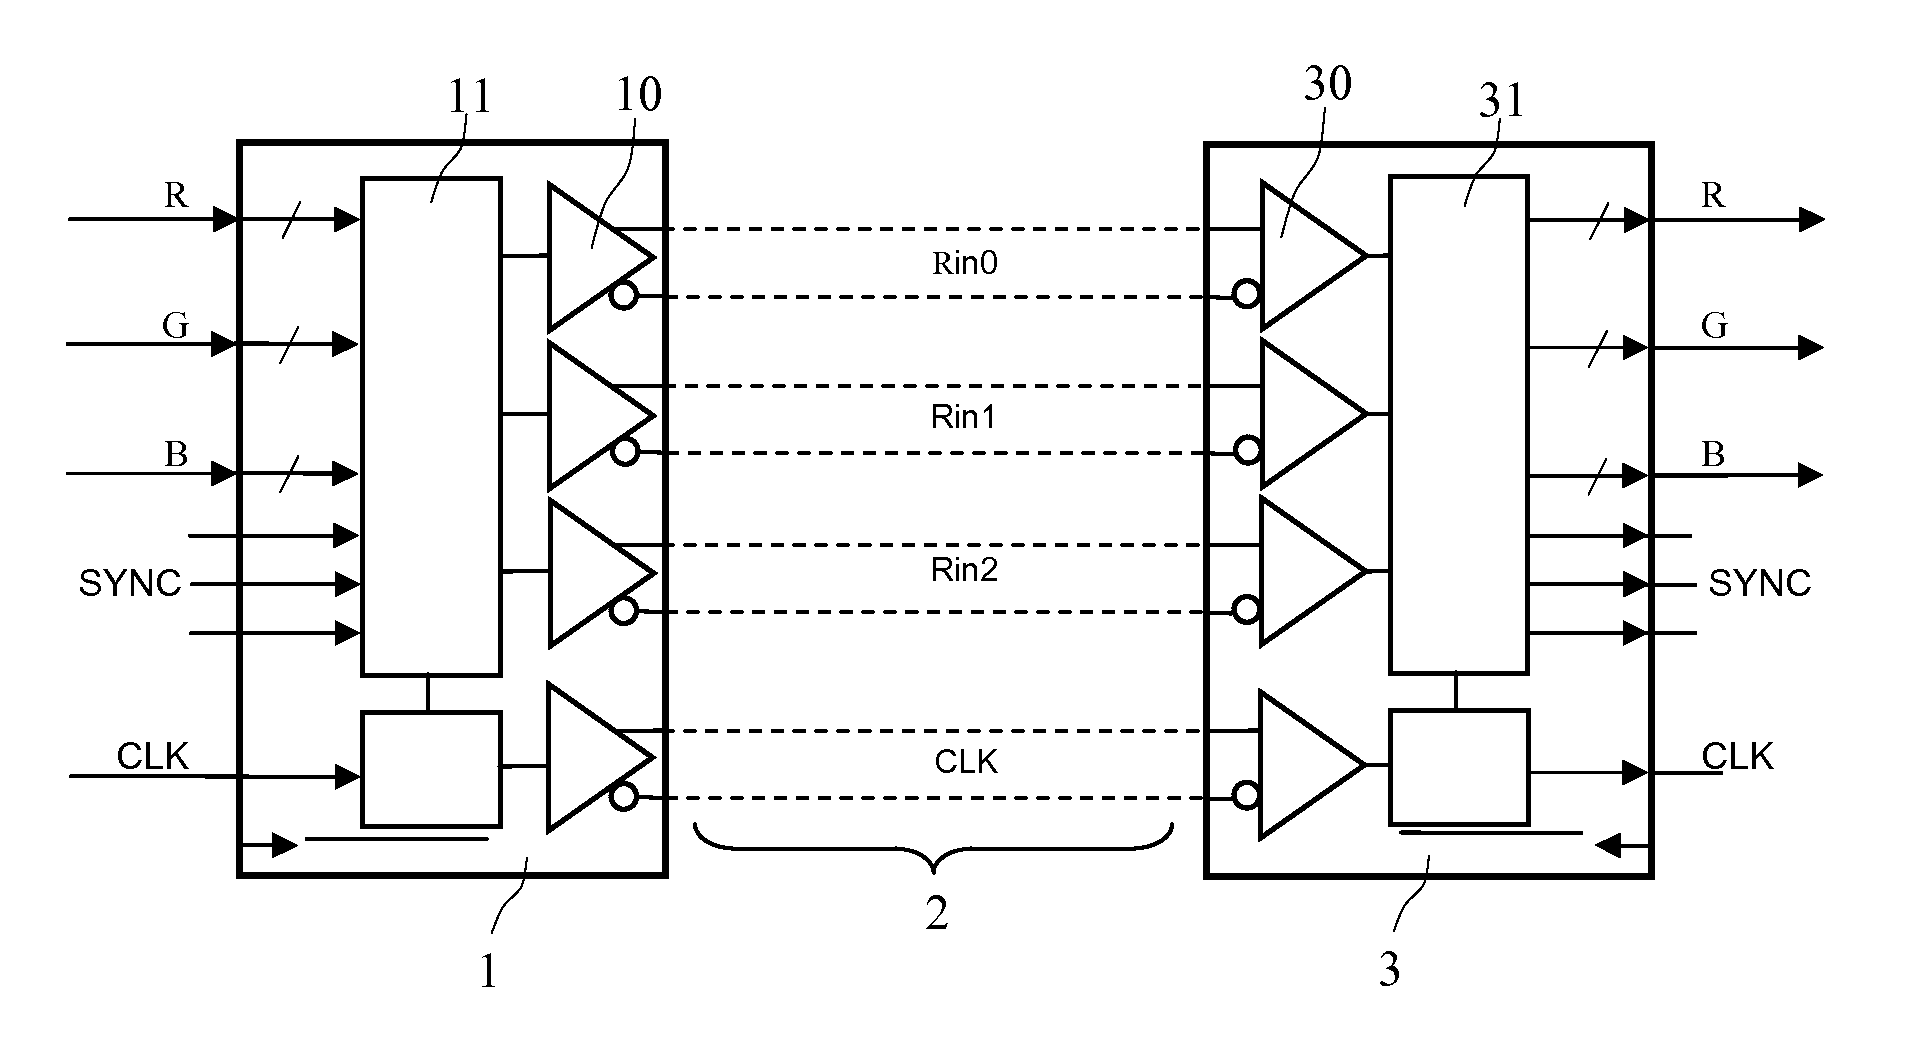 System for Transmitting and Receiving Video Digital Signals for Links of the "LVDS" Type